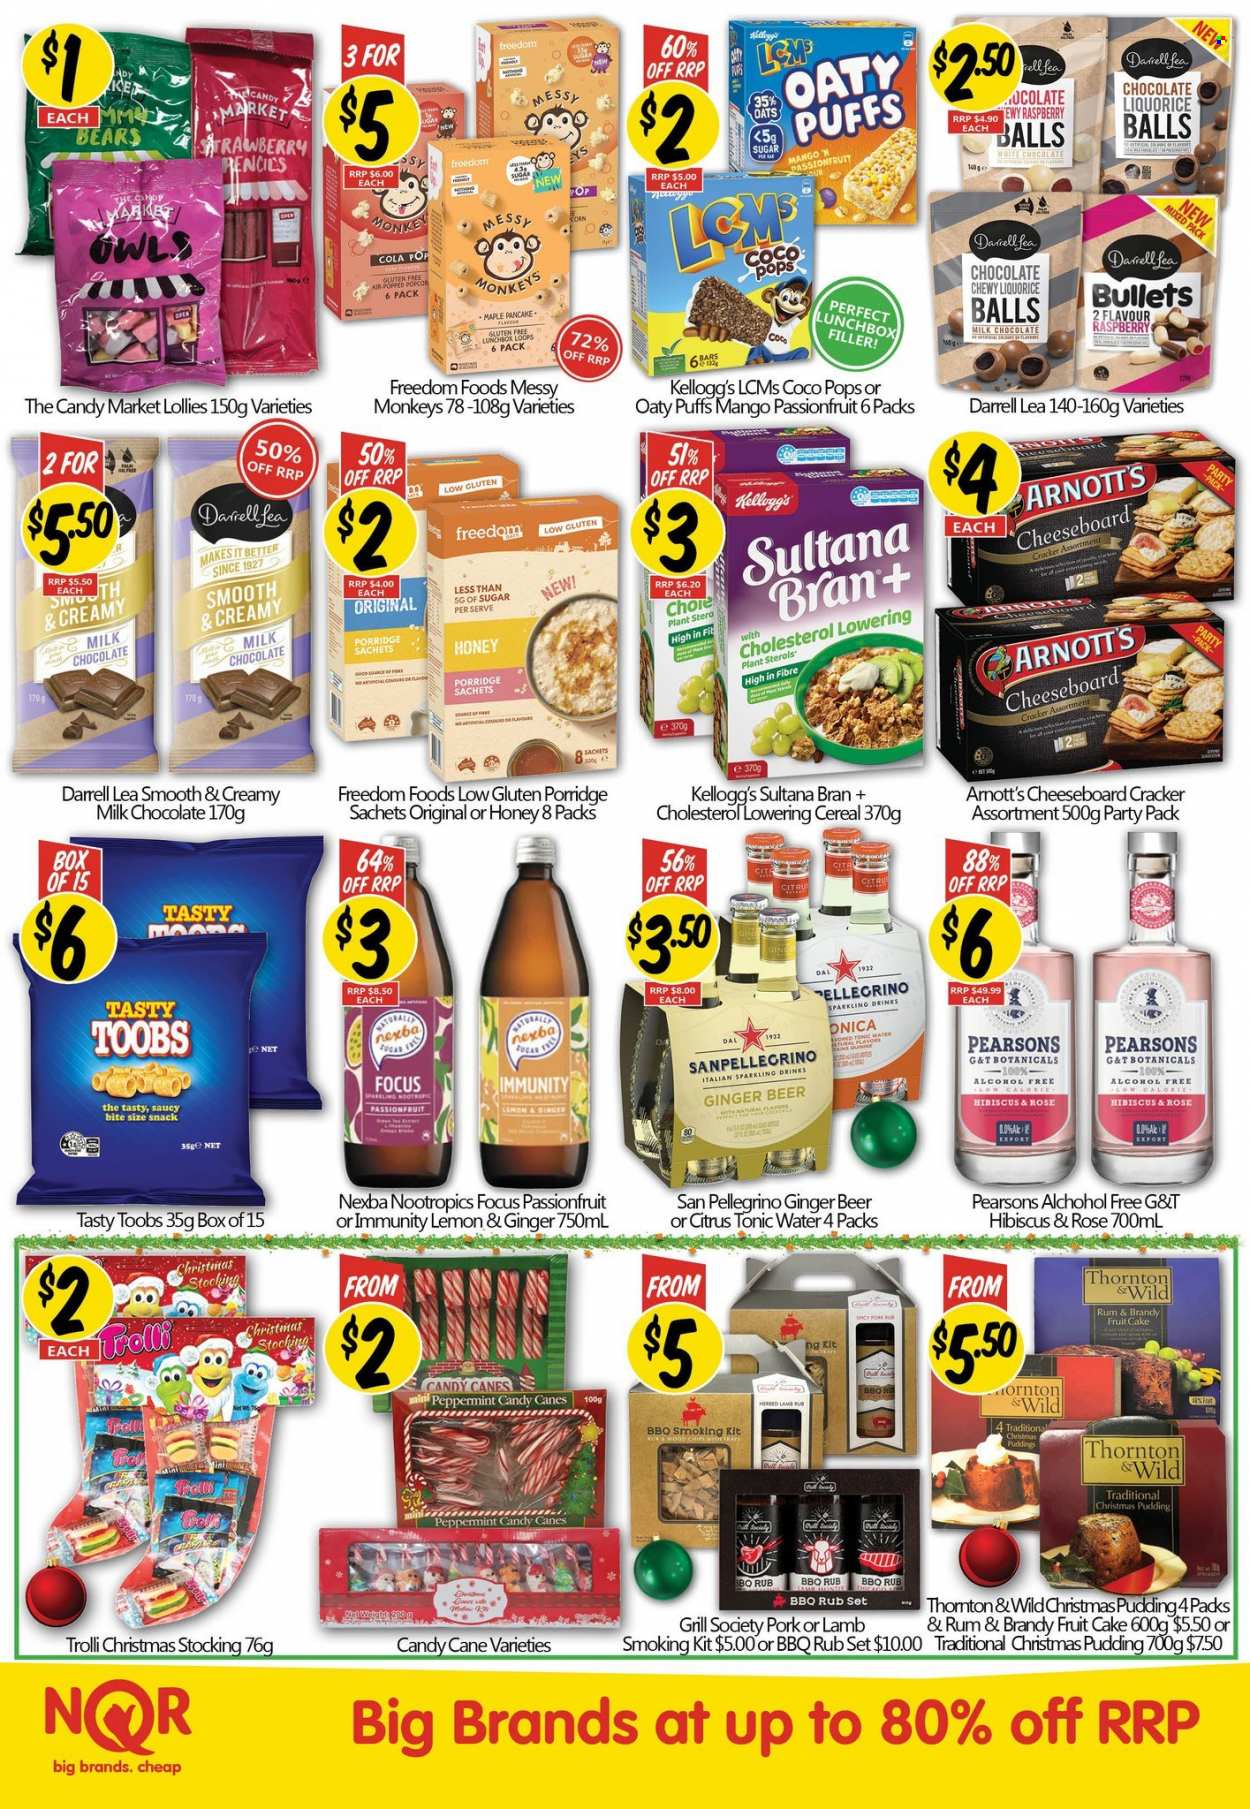 thumbnail - NQR Catalogue - 7 Dec 2022 - 20 Dec 2022 - Sales products - cake, puffs, pancakes, pudding, milk chocolate, chocolate, snack, candy cane, Trolli, crackers, Kellogg's, sugar, oats, cereals, coco pops, porridge, tonic, San Pellegrino, wine, rosé wine, brandy, rum, beer, Miller, meal box, pet bed, ginger beer. Page 2.